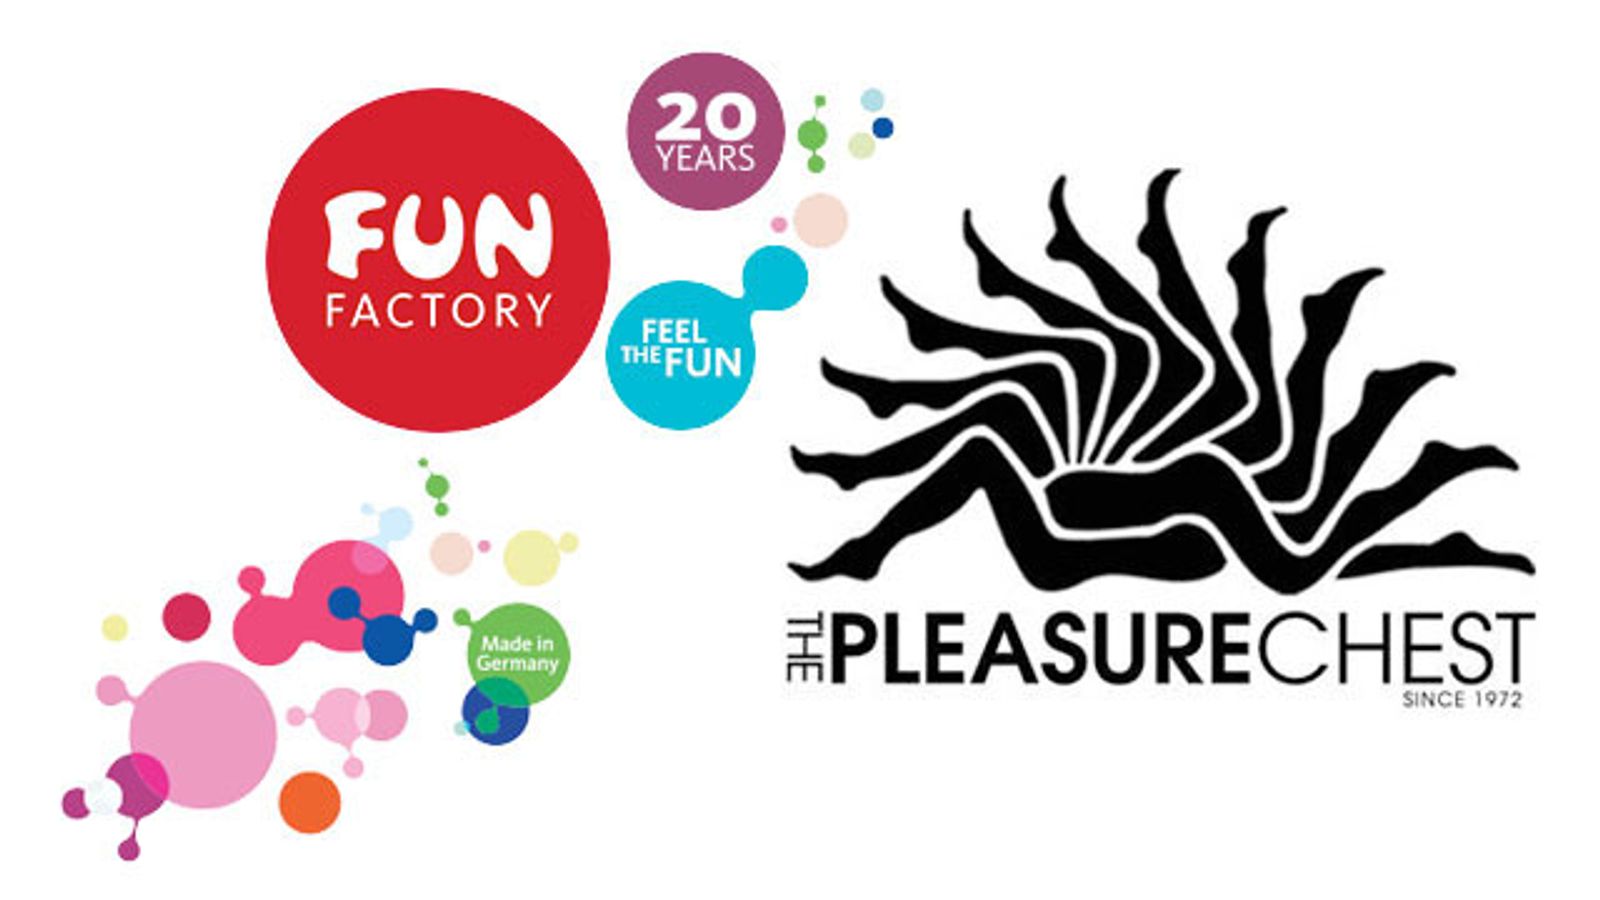 Fun Factory Teams With Pleasure Chest To Present Wine, Aphrodisiac, Toy Pairing